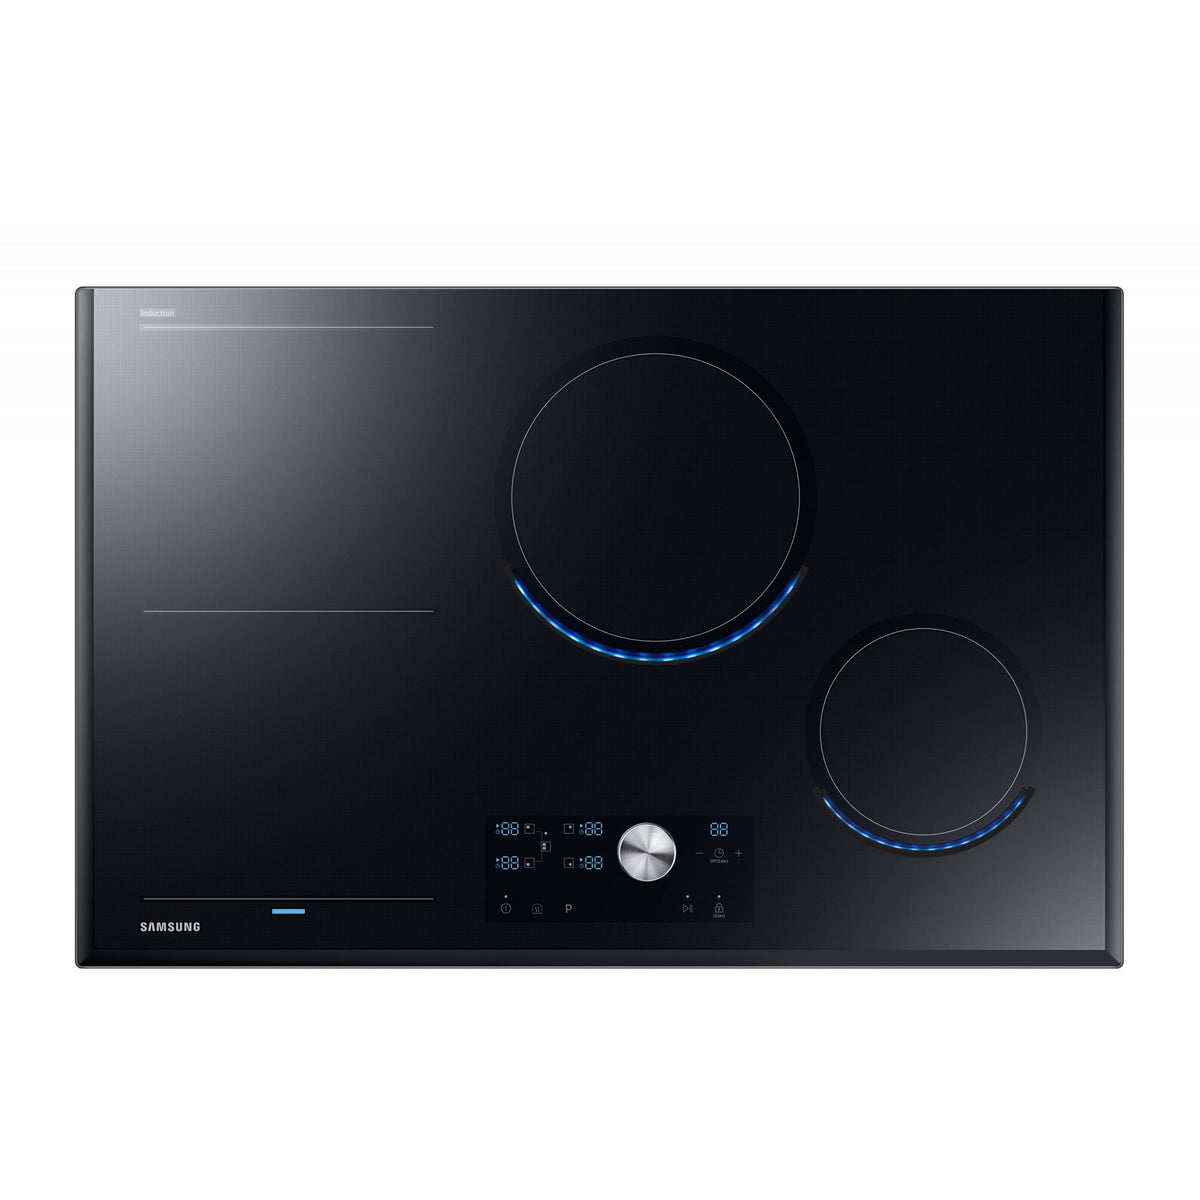 Samsung NZ9000 Chef Collection 80cm Built-In Induction Hob - Black | NZ84T9770EK/EU from Samsung - DID Electrical